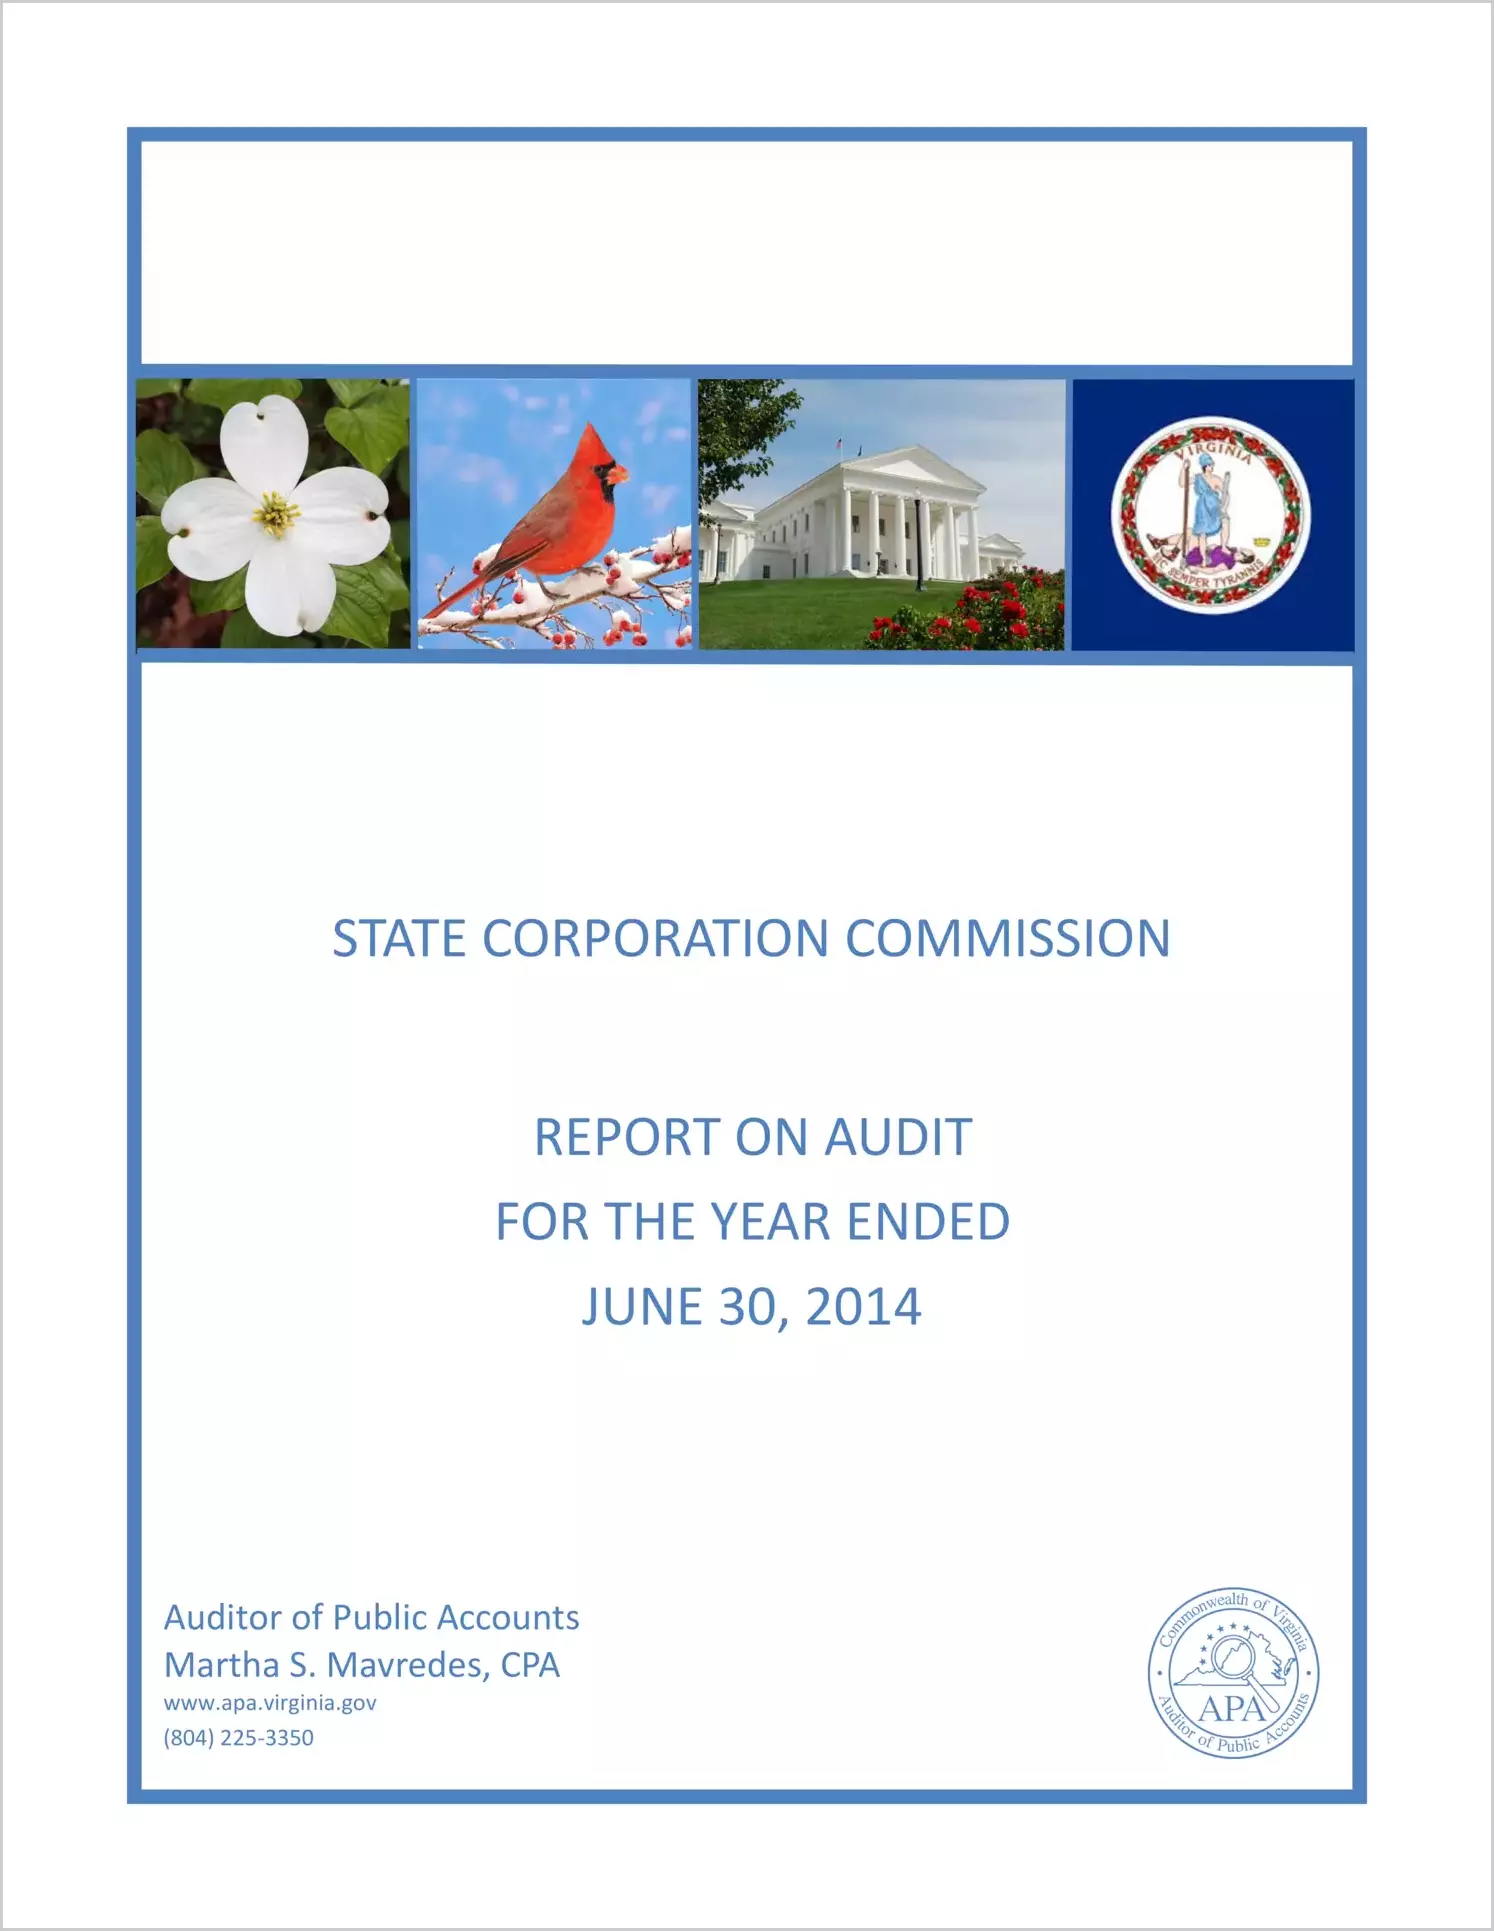 State Corporation Commission for the fiscal year ended June 30, 2014